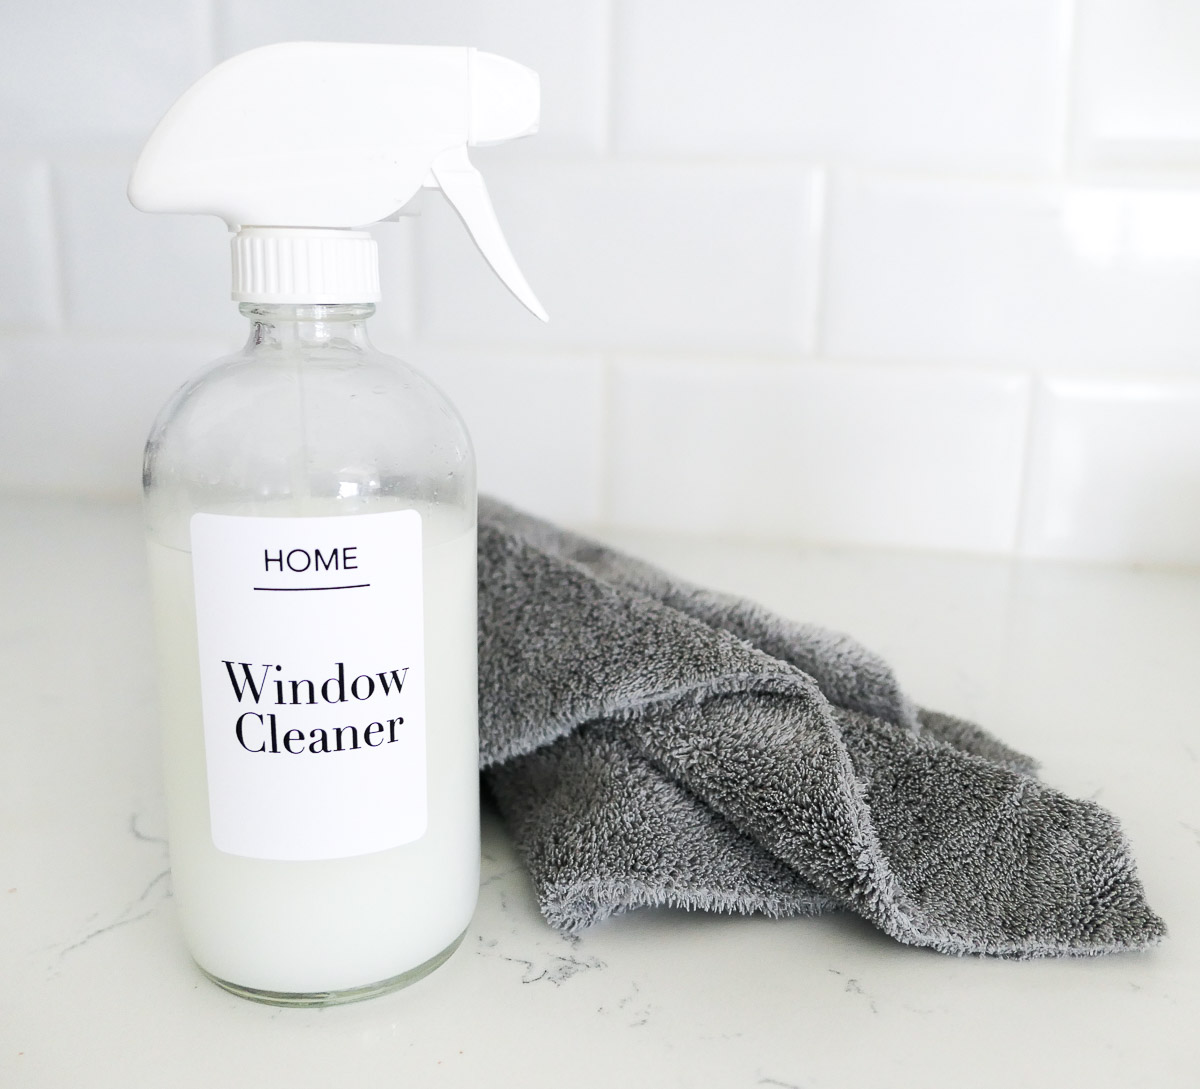 DIY WINDOW CLEANER review